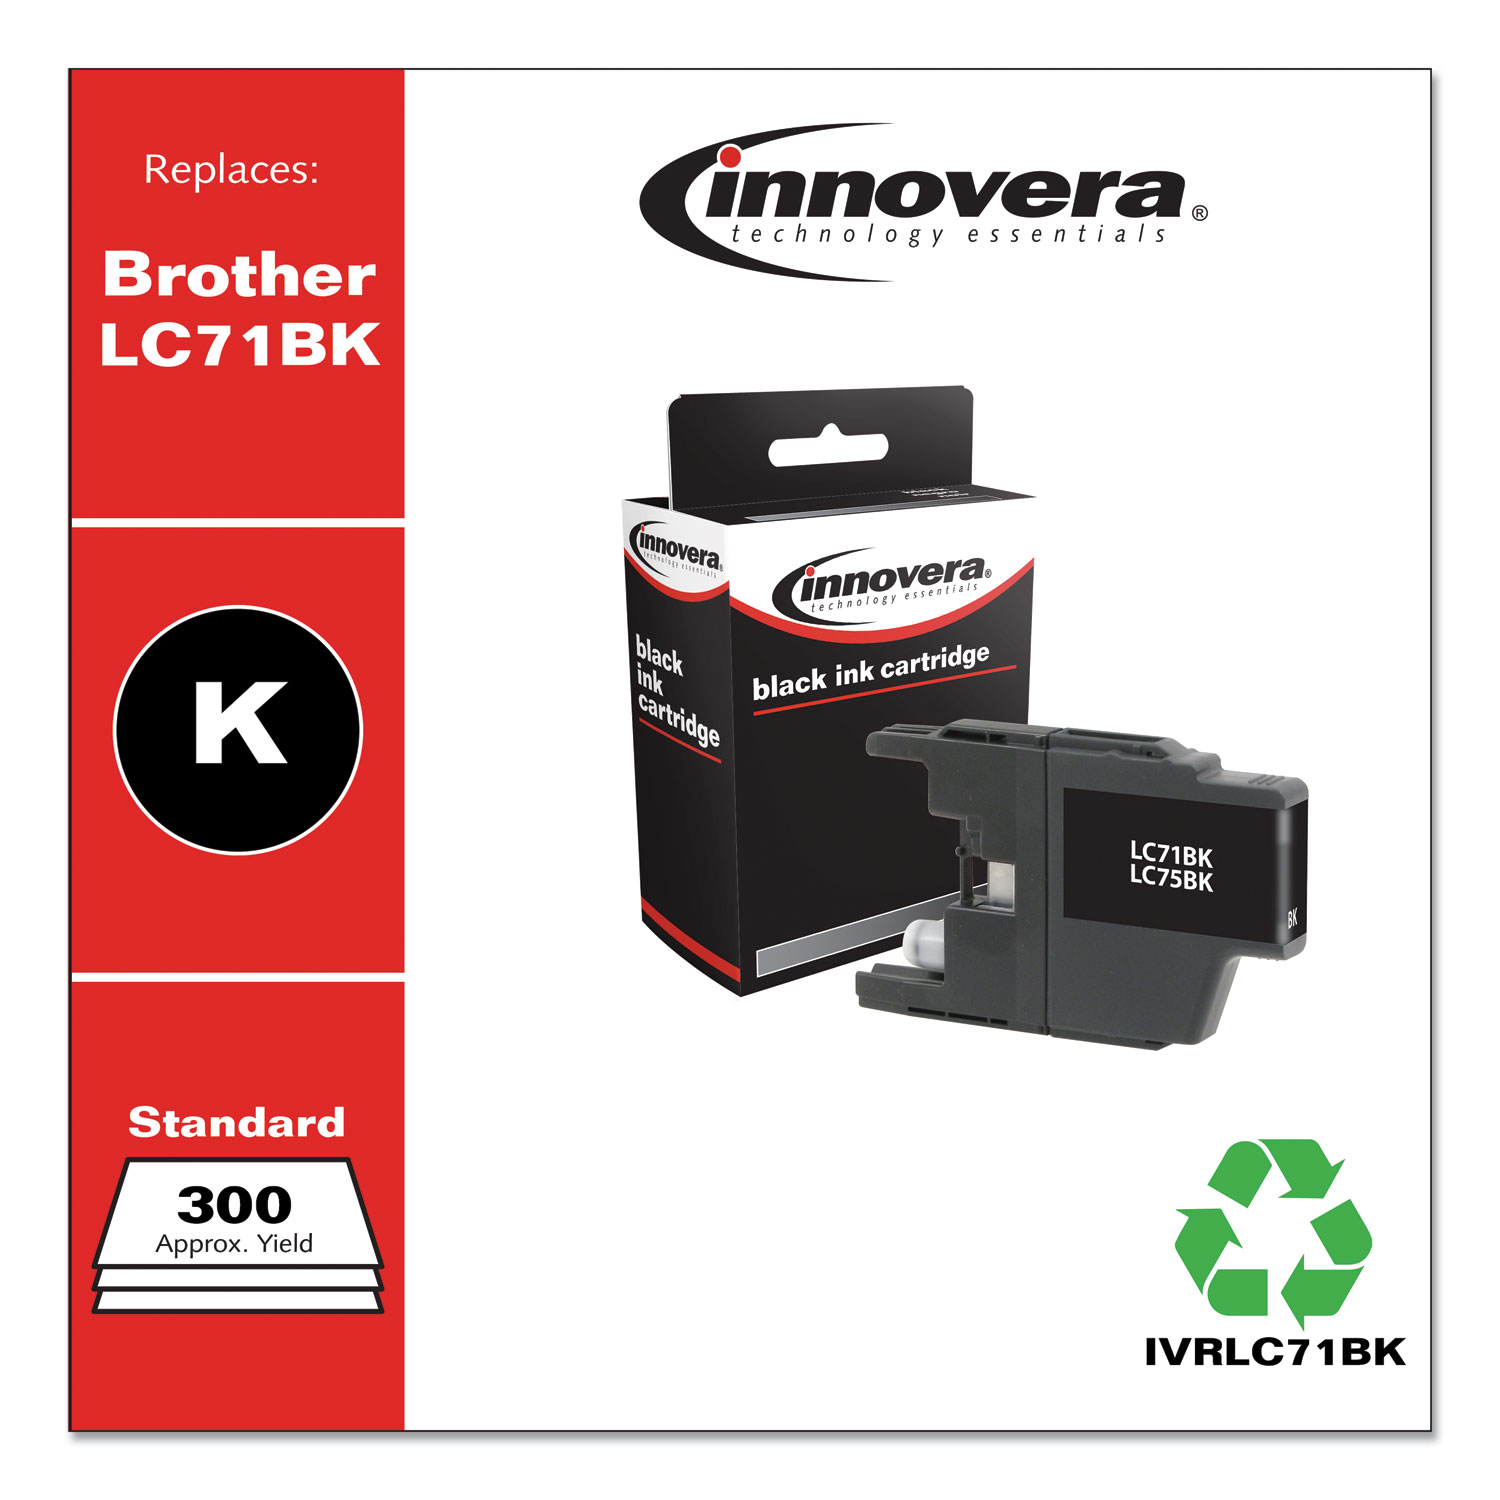  Innovera IVRLC71BK Remanufactured Black Ink, Replacement for Brother LC71BK, 300 Page-Yield (IVRLC71BK) 